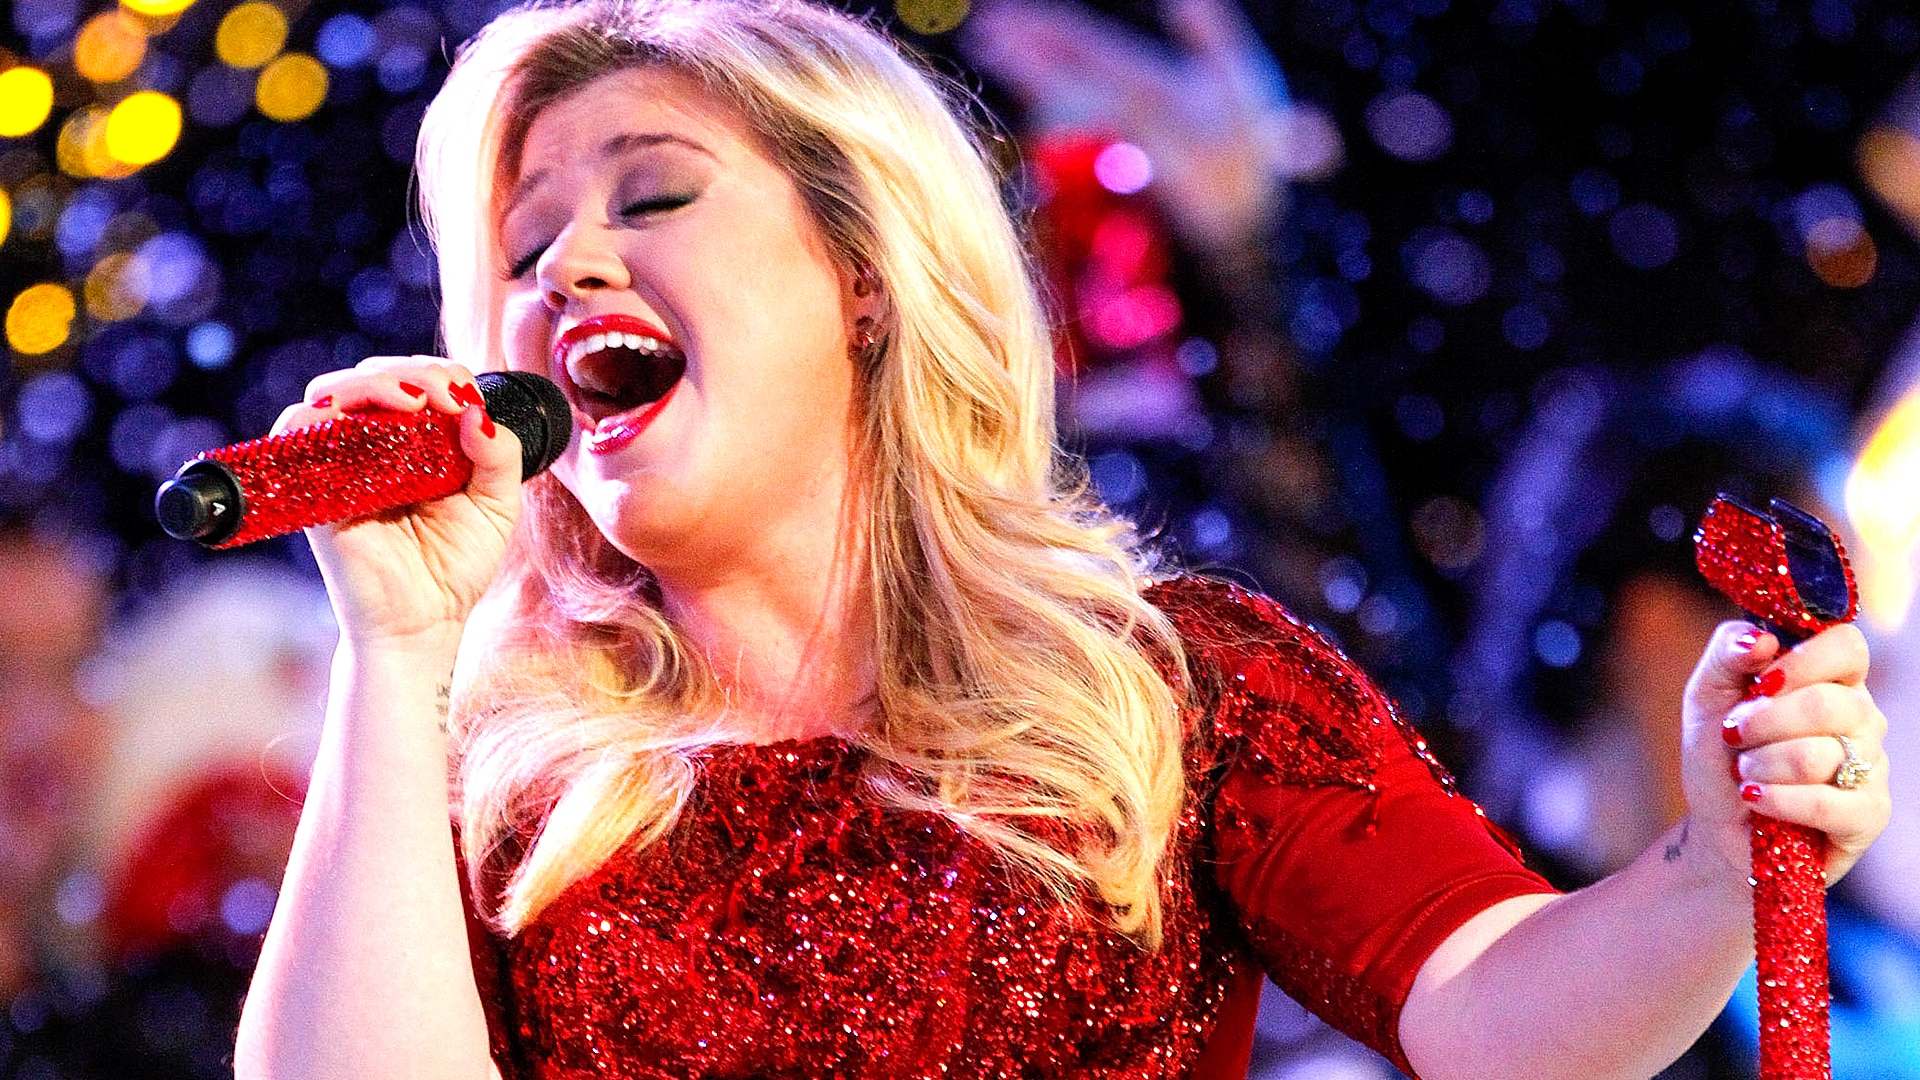 Watch The Voice Highlight: Kelly Clarkson Performs Her Holiday Single